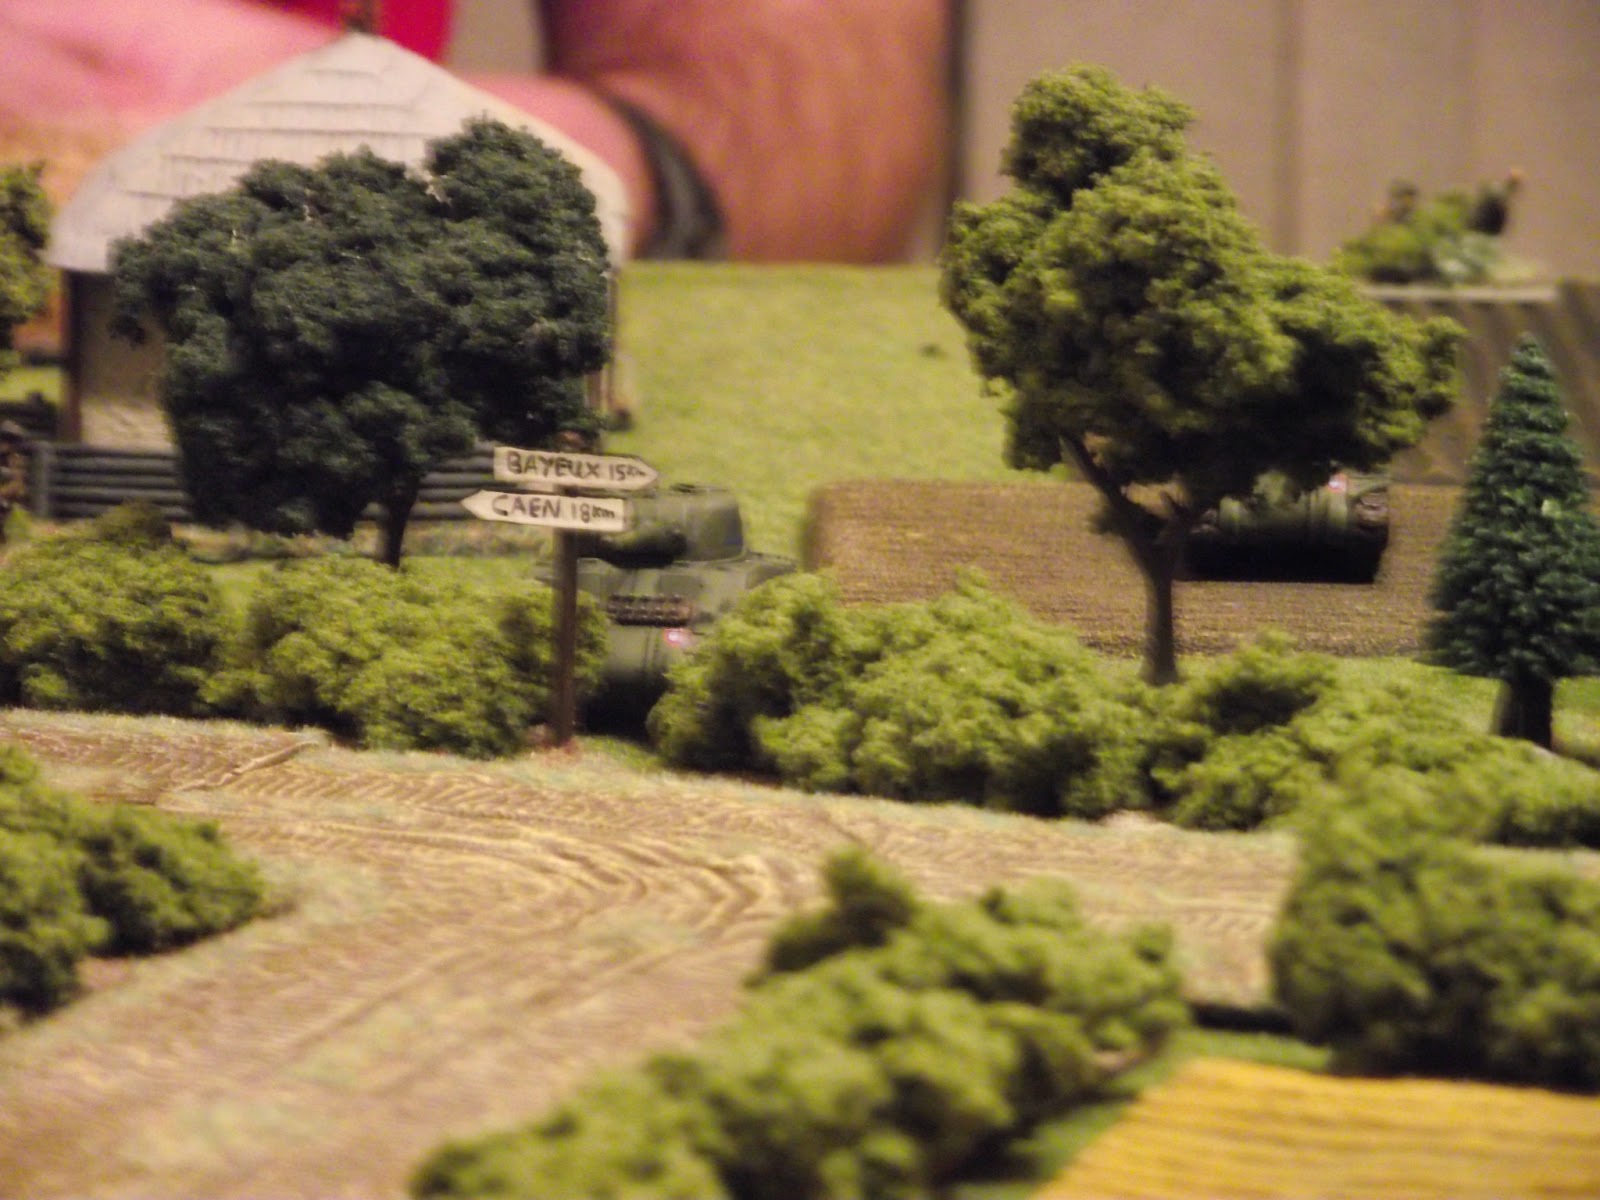   David moves up his Firefly to take up engage orders along the hedge.  